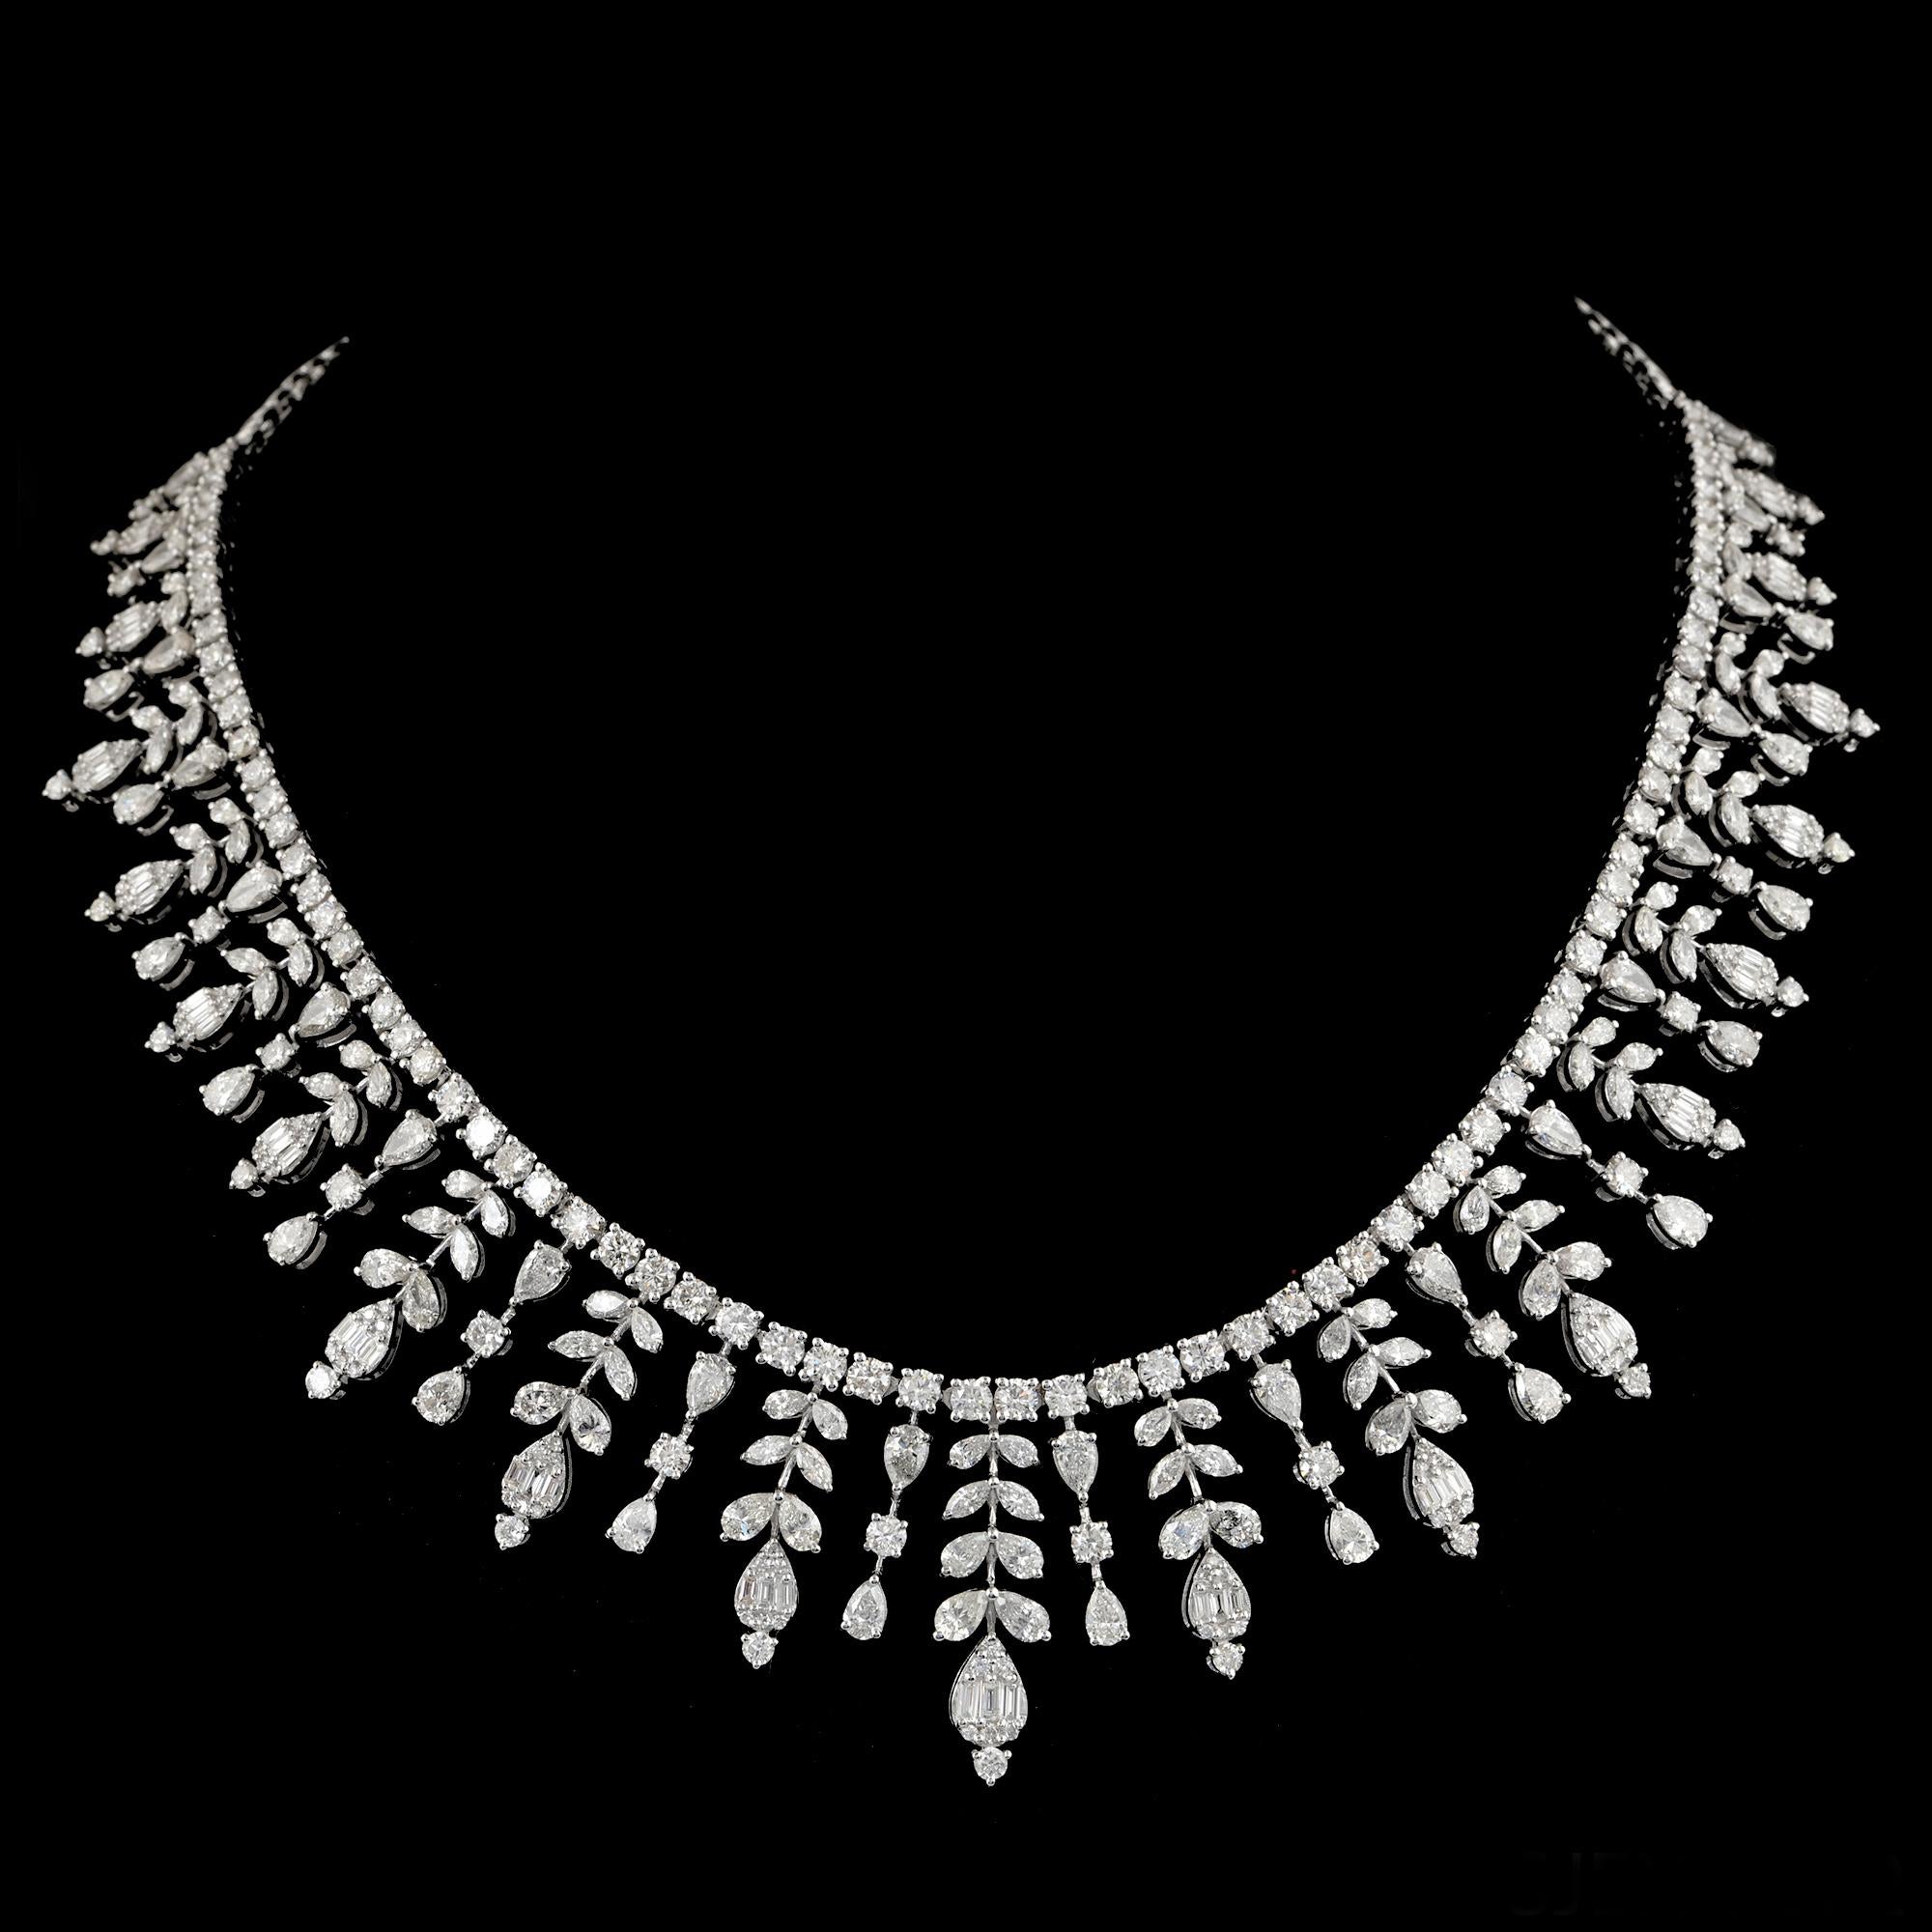 Enhance your jewelry collection with this exquisite handmade necklace featuring a stunning 21.01 carat diamond spike design, crafted in 14 karat white gold. This luxurious piece of jewelry is available exclusively on 1stdibs, offering a truly